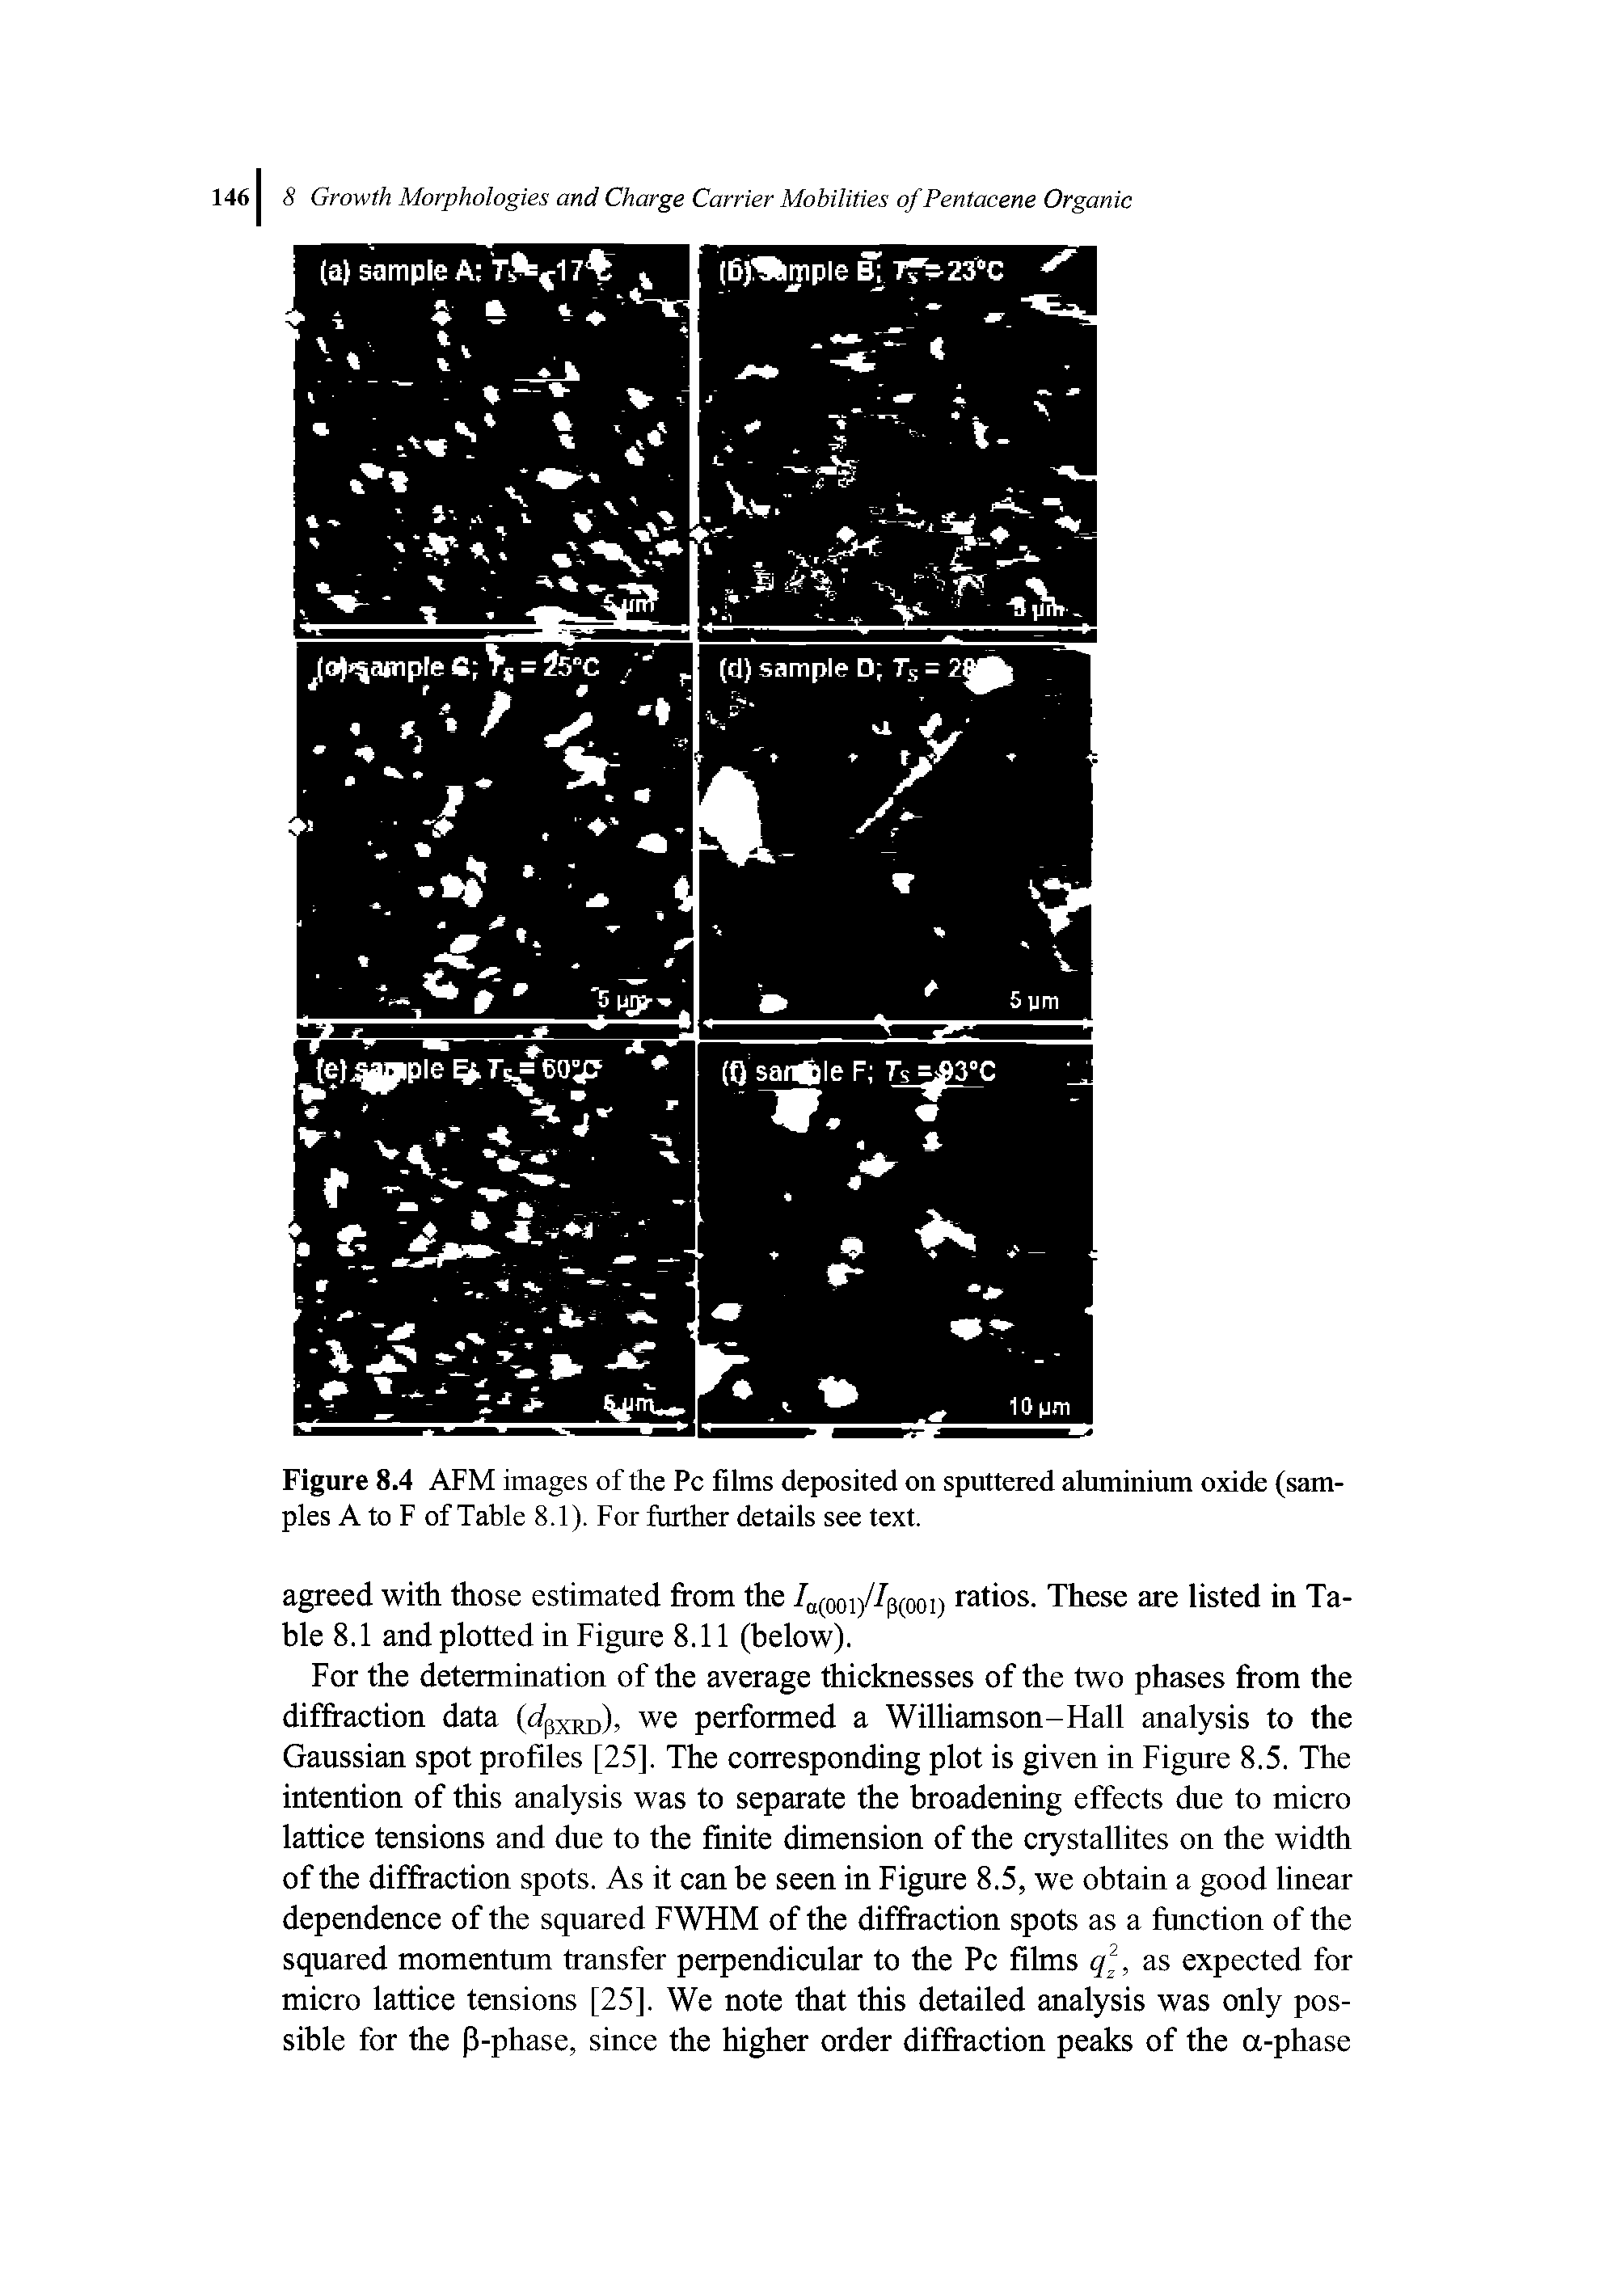 Figure 8.4 AFM images of the Pc films deposited on sputtered aluminium oxide (samples A to F of Table 8.1). For further details see text.